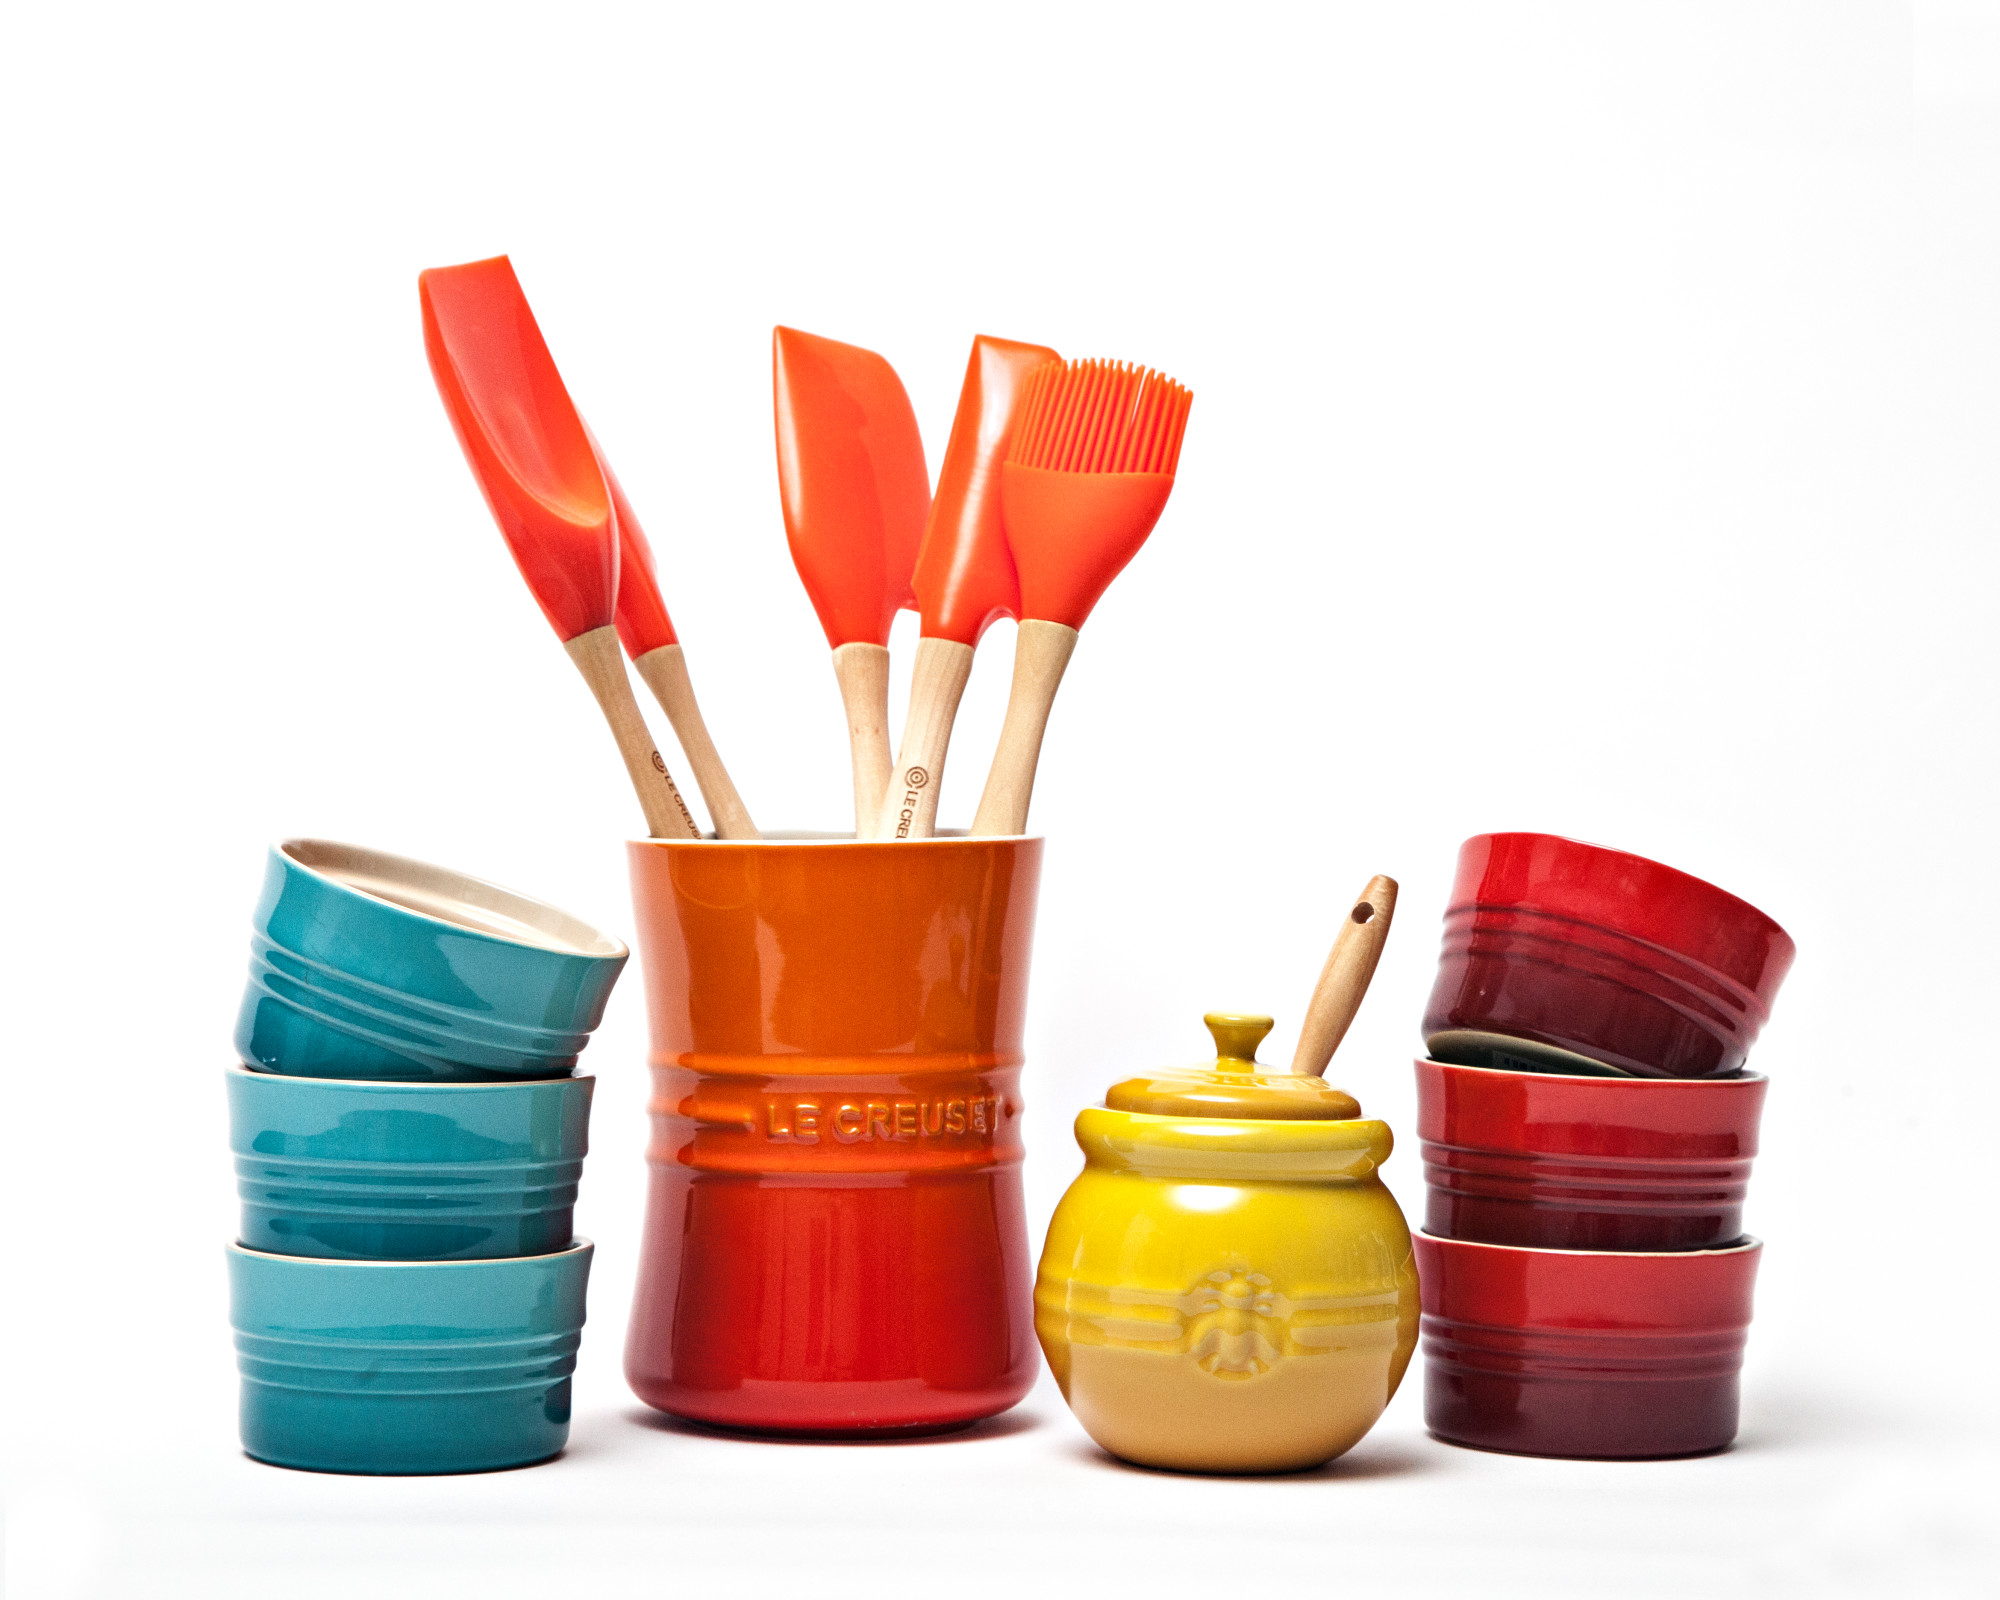 Le Creuset crock with cooking utsensils in flame orange, ramekins in teal blue and red, and honey pot in yellow